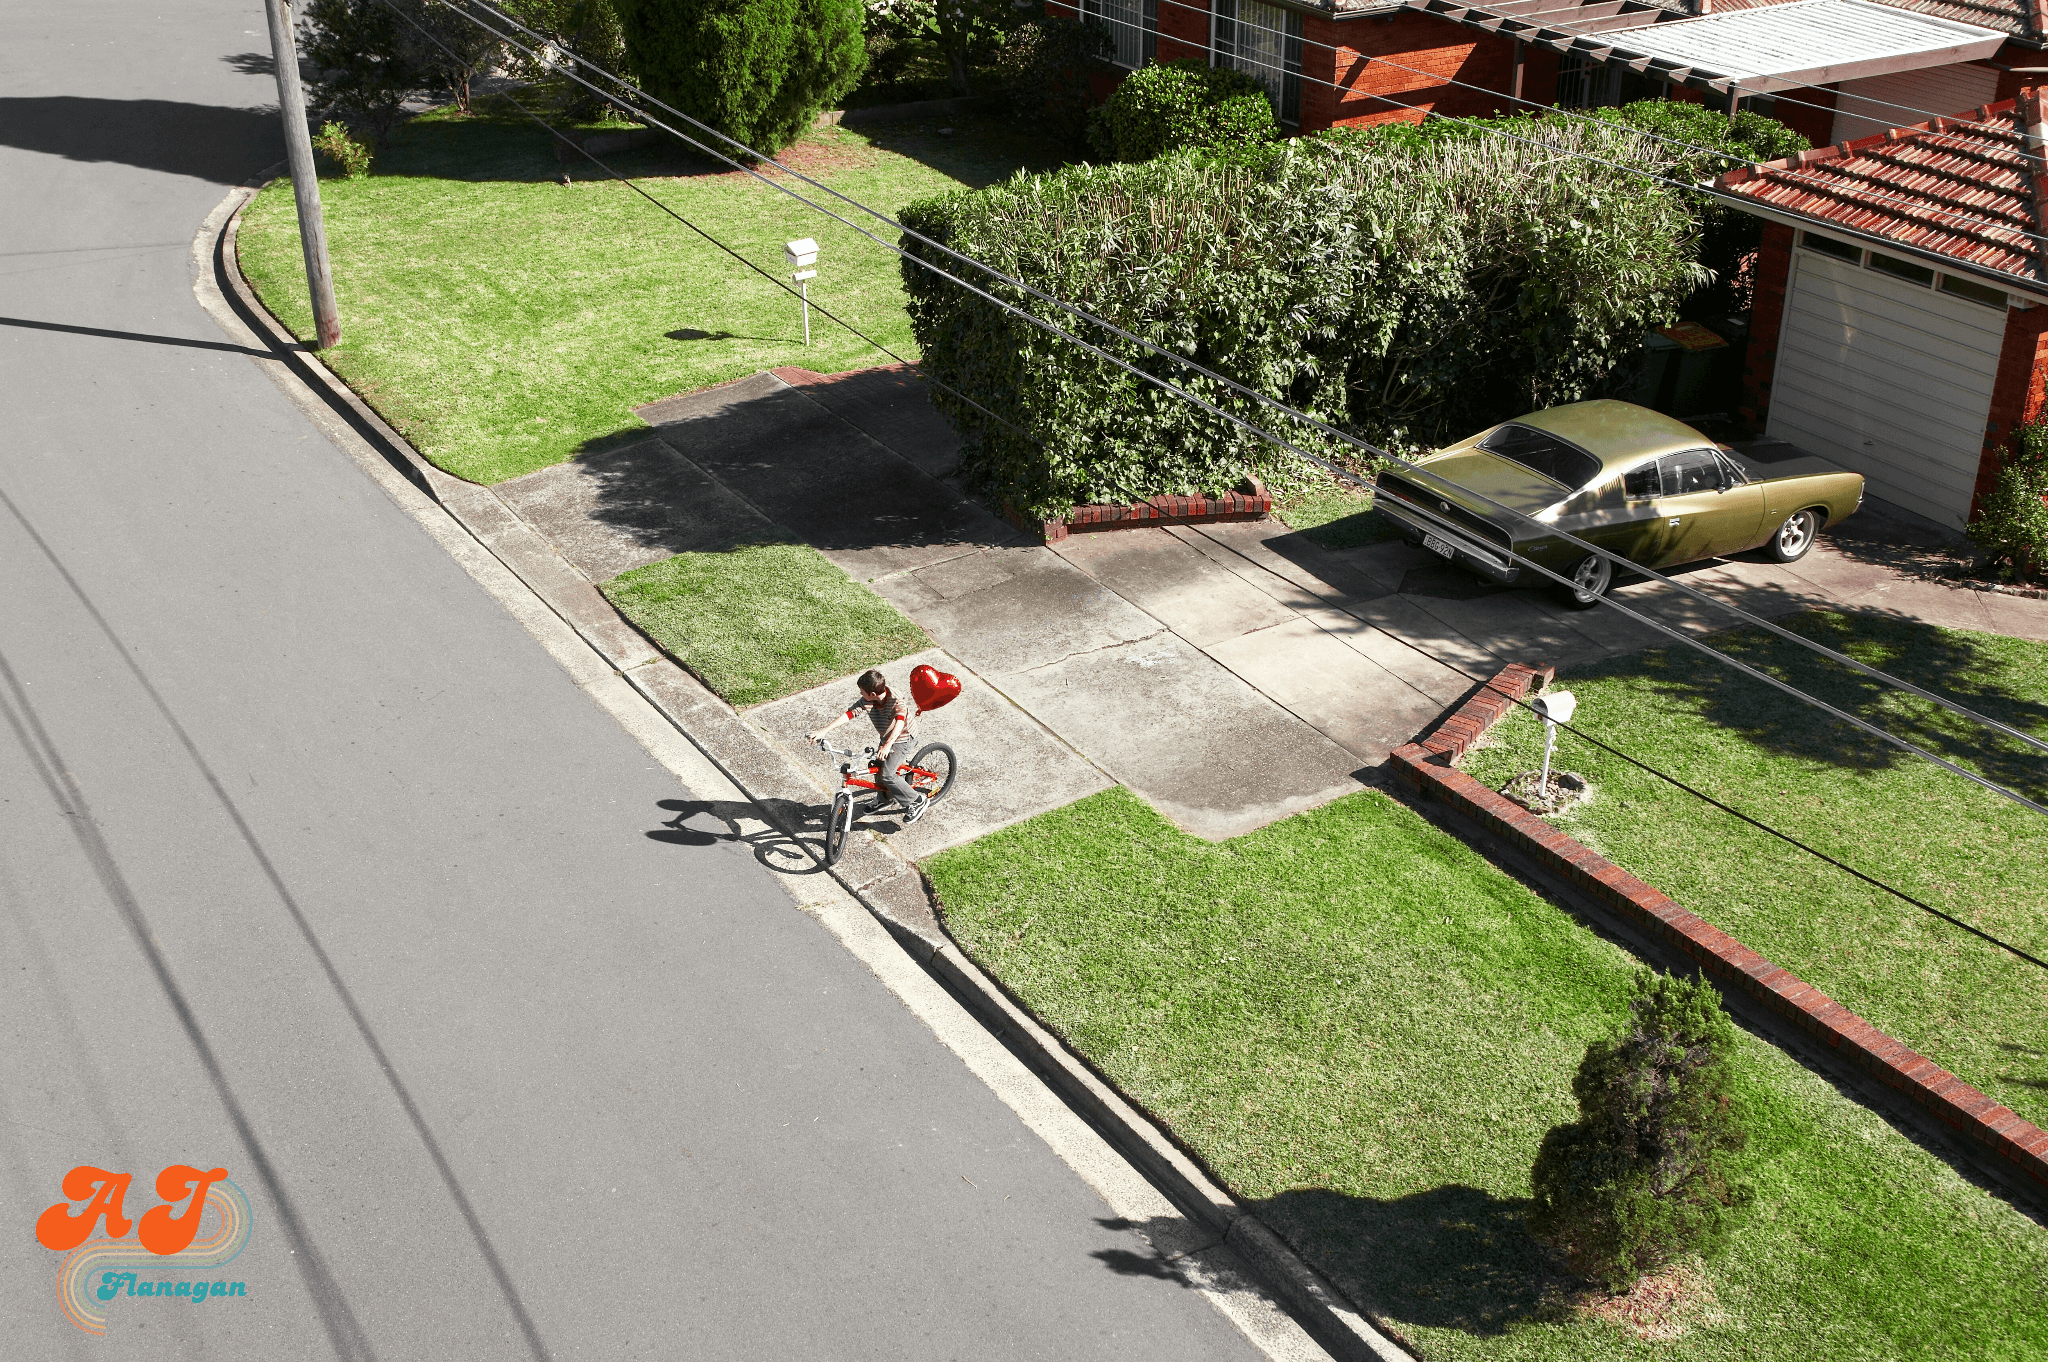 Nostalgic neighborhood with a child on a bike in the driveway